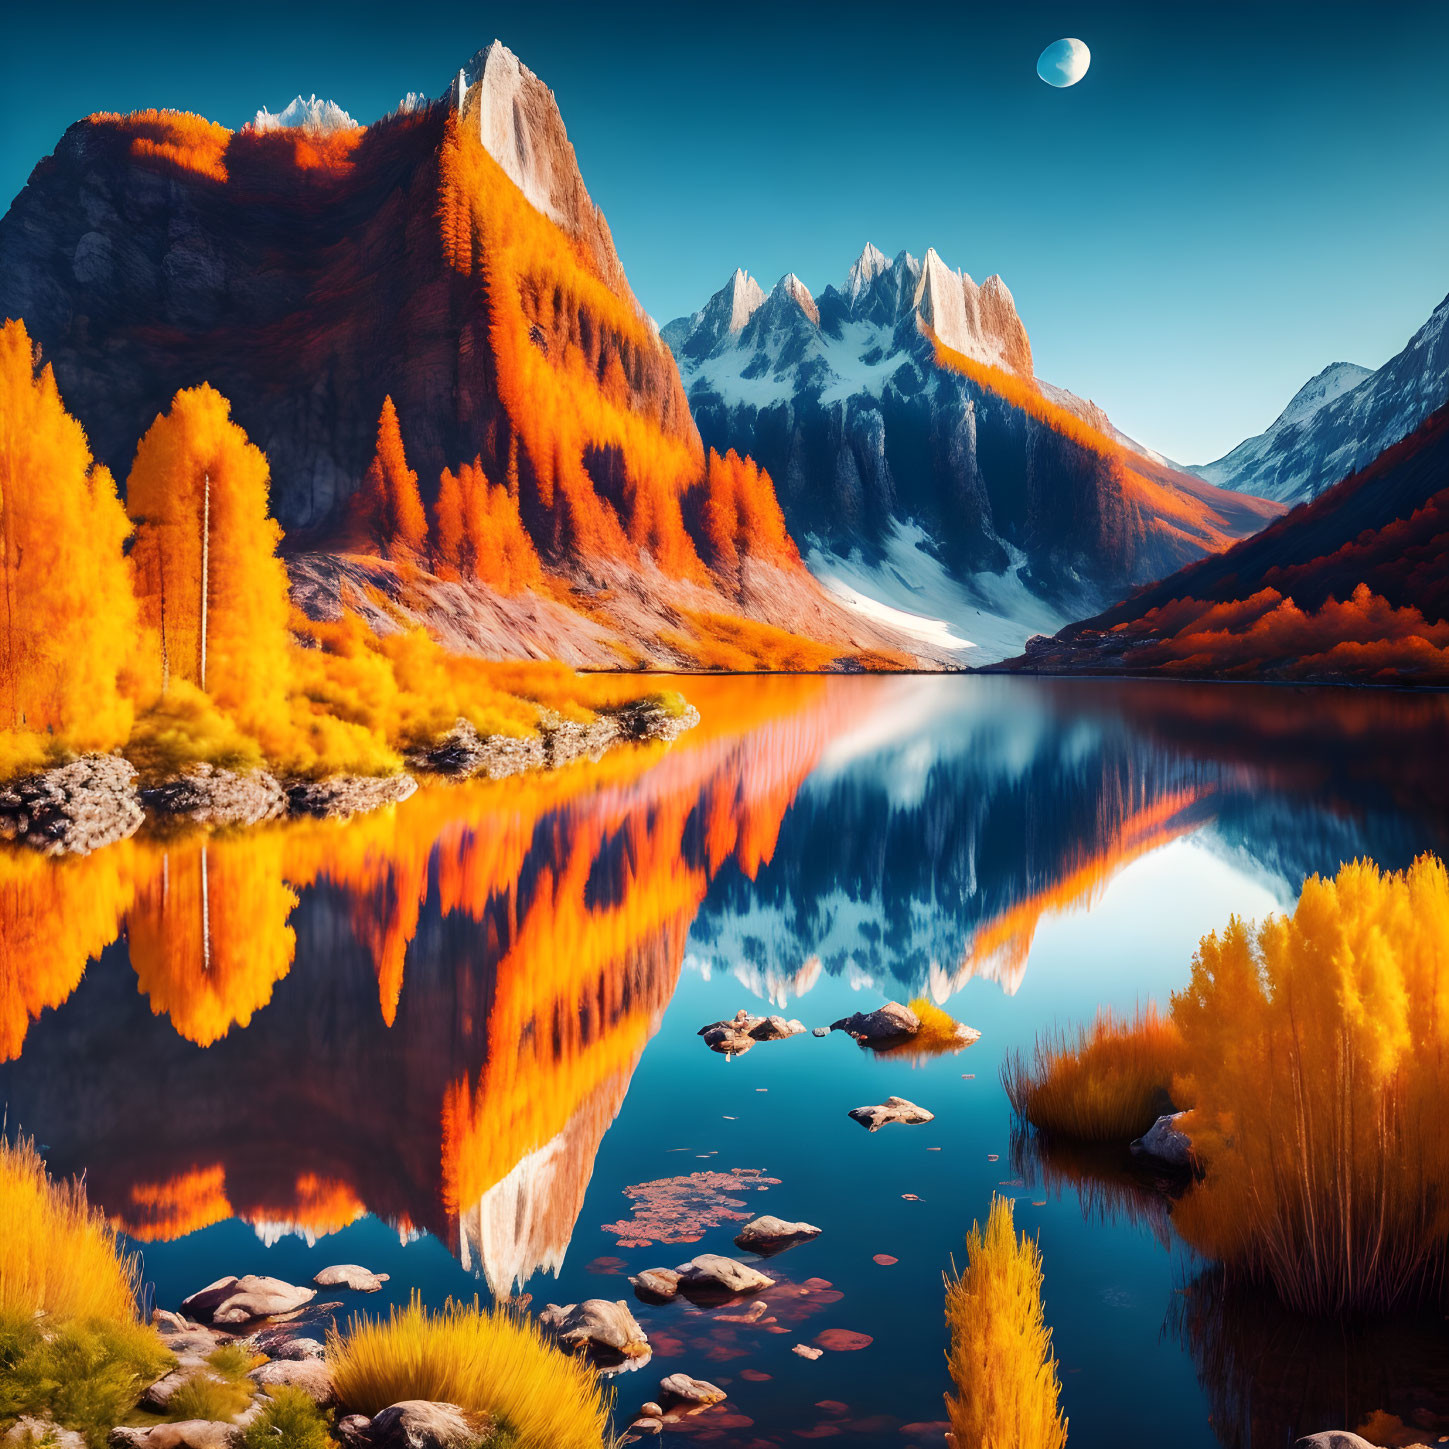 Vivid Autumn Trees Reflected in Tranquil Lake